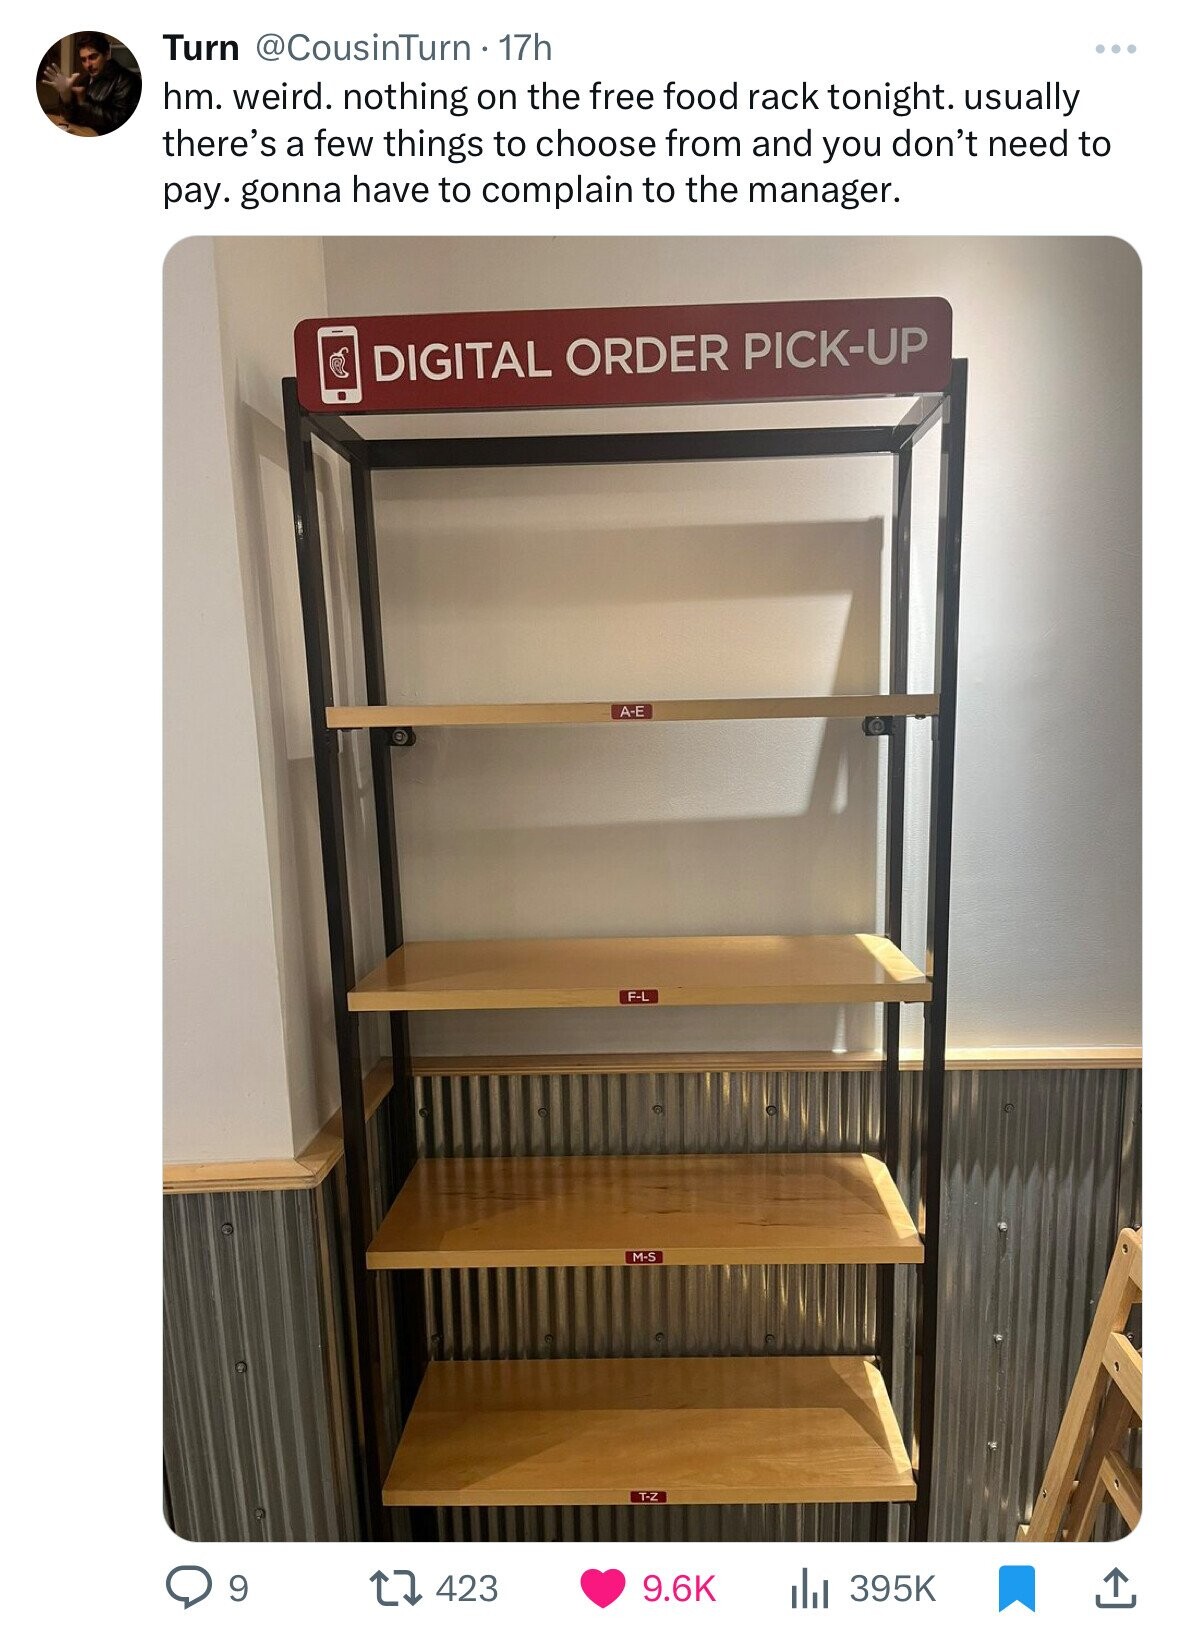 bookcase - Turn 17h hm. weird. nothing on the free food rack tonight. usually there's a few things to choose from and you don't need to pay. gonna have to complain to the manager. Digital Order PickUp 1423 AE FL MS TZ l